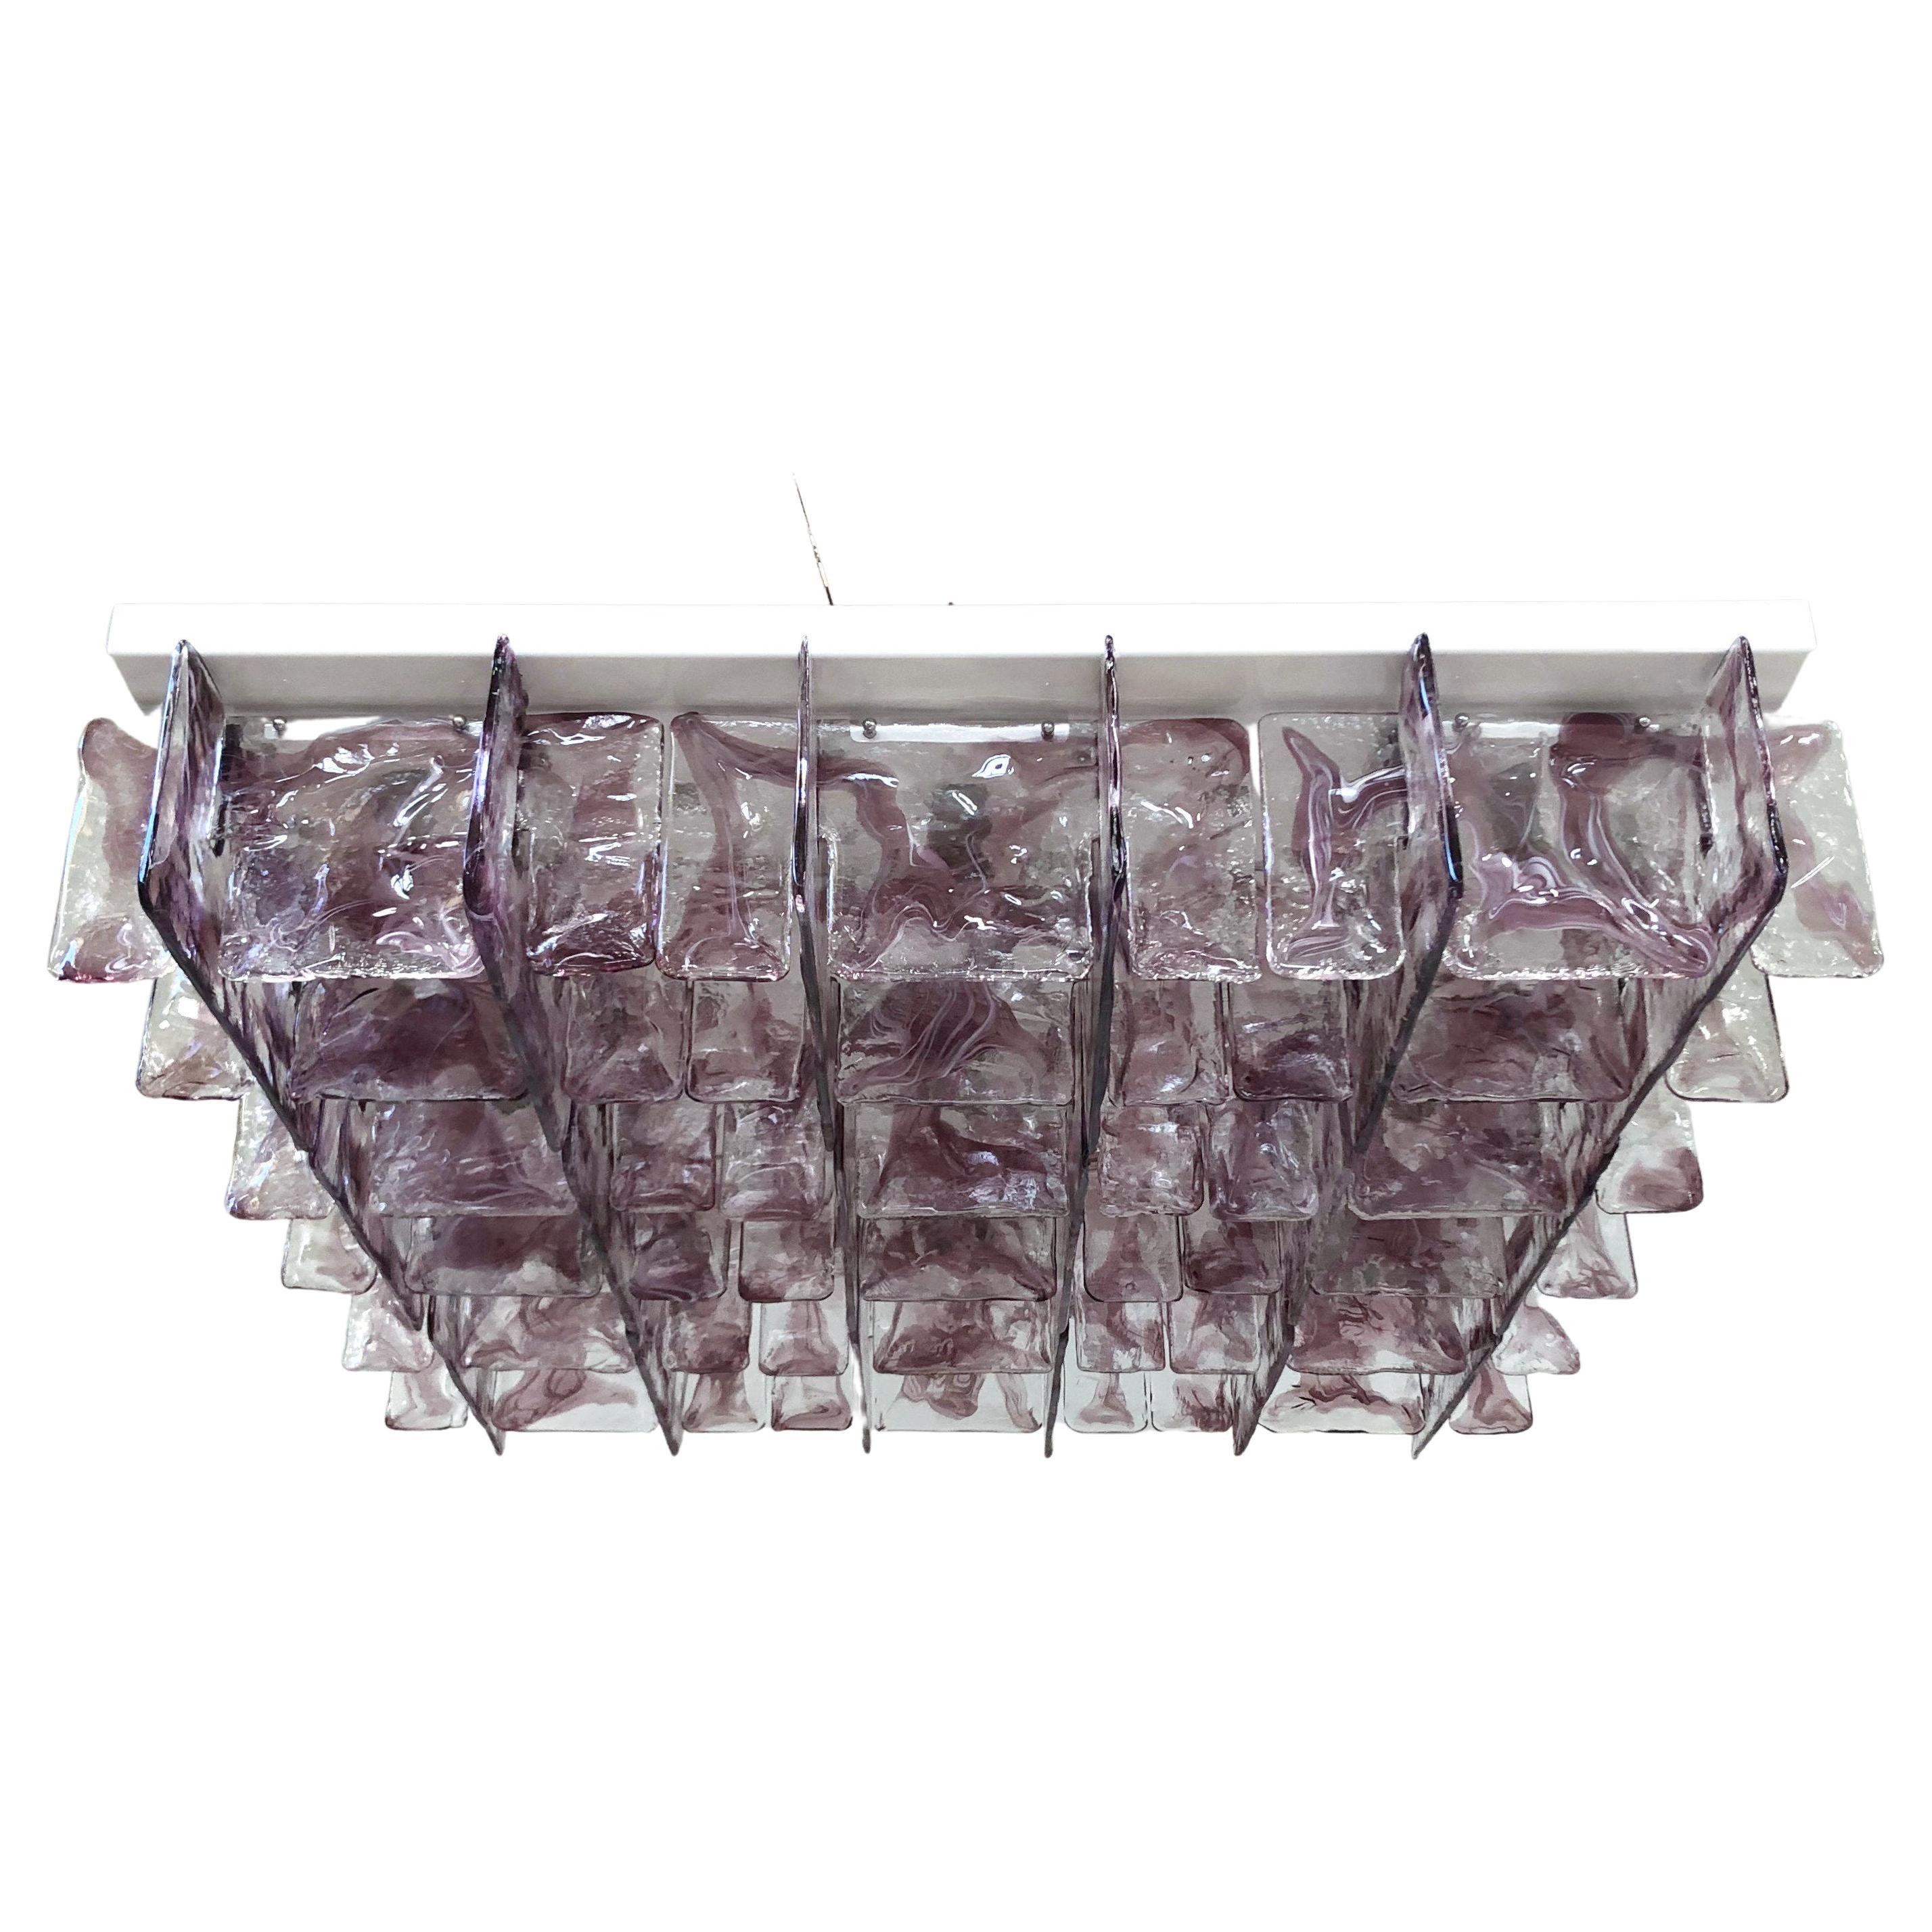 Italian flushmount with hand blown clear and amethyst Murano glass panels mounted on white metal frame with chrome hardware / Designed by Fabio Bergomi for Fabio Ltd, in the style of Mazzega / Made in Italy
9 lights / E26 or E27 type / max 60W